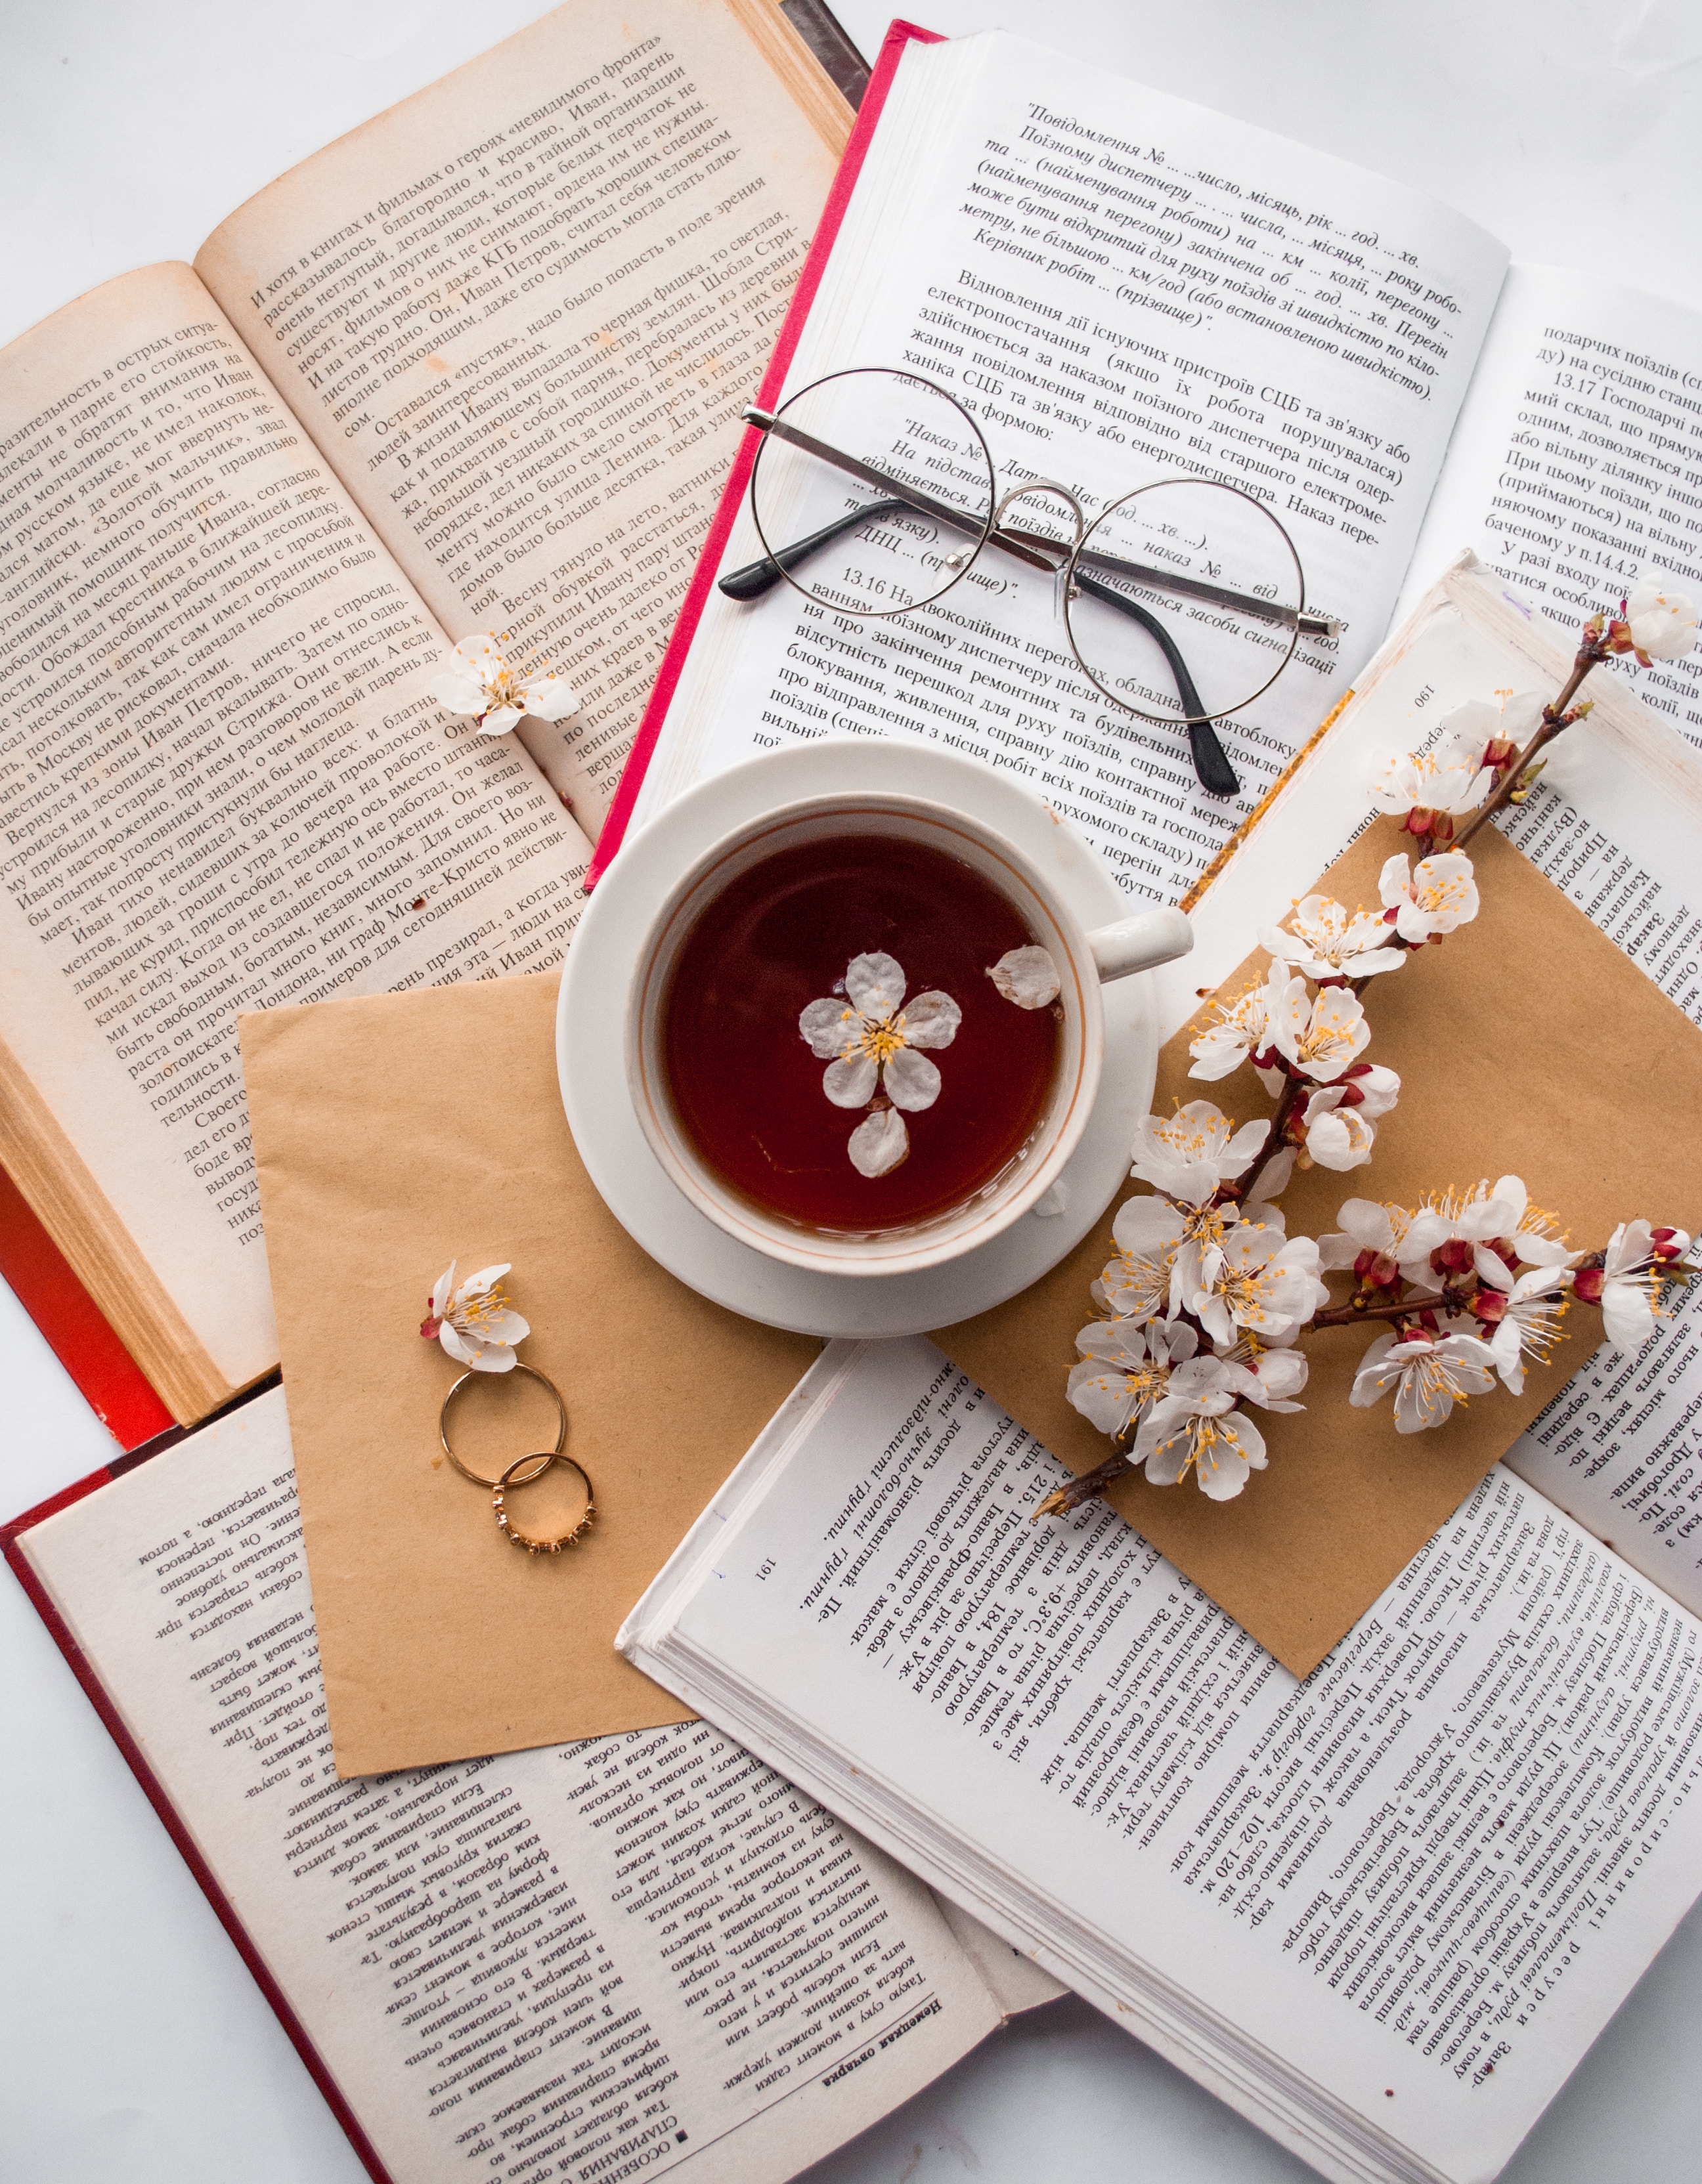 books, flowers, rings, miscellanea, miscellaneous, cup, glasses, spectacles High Definition image